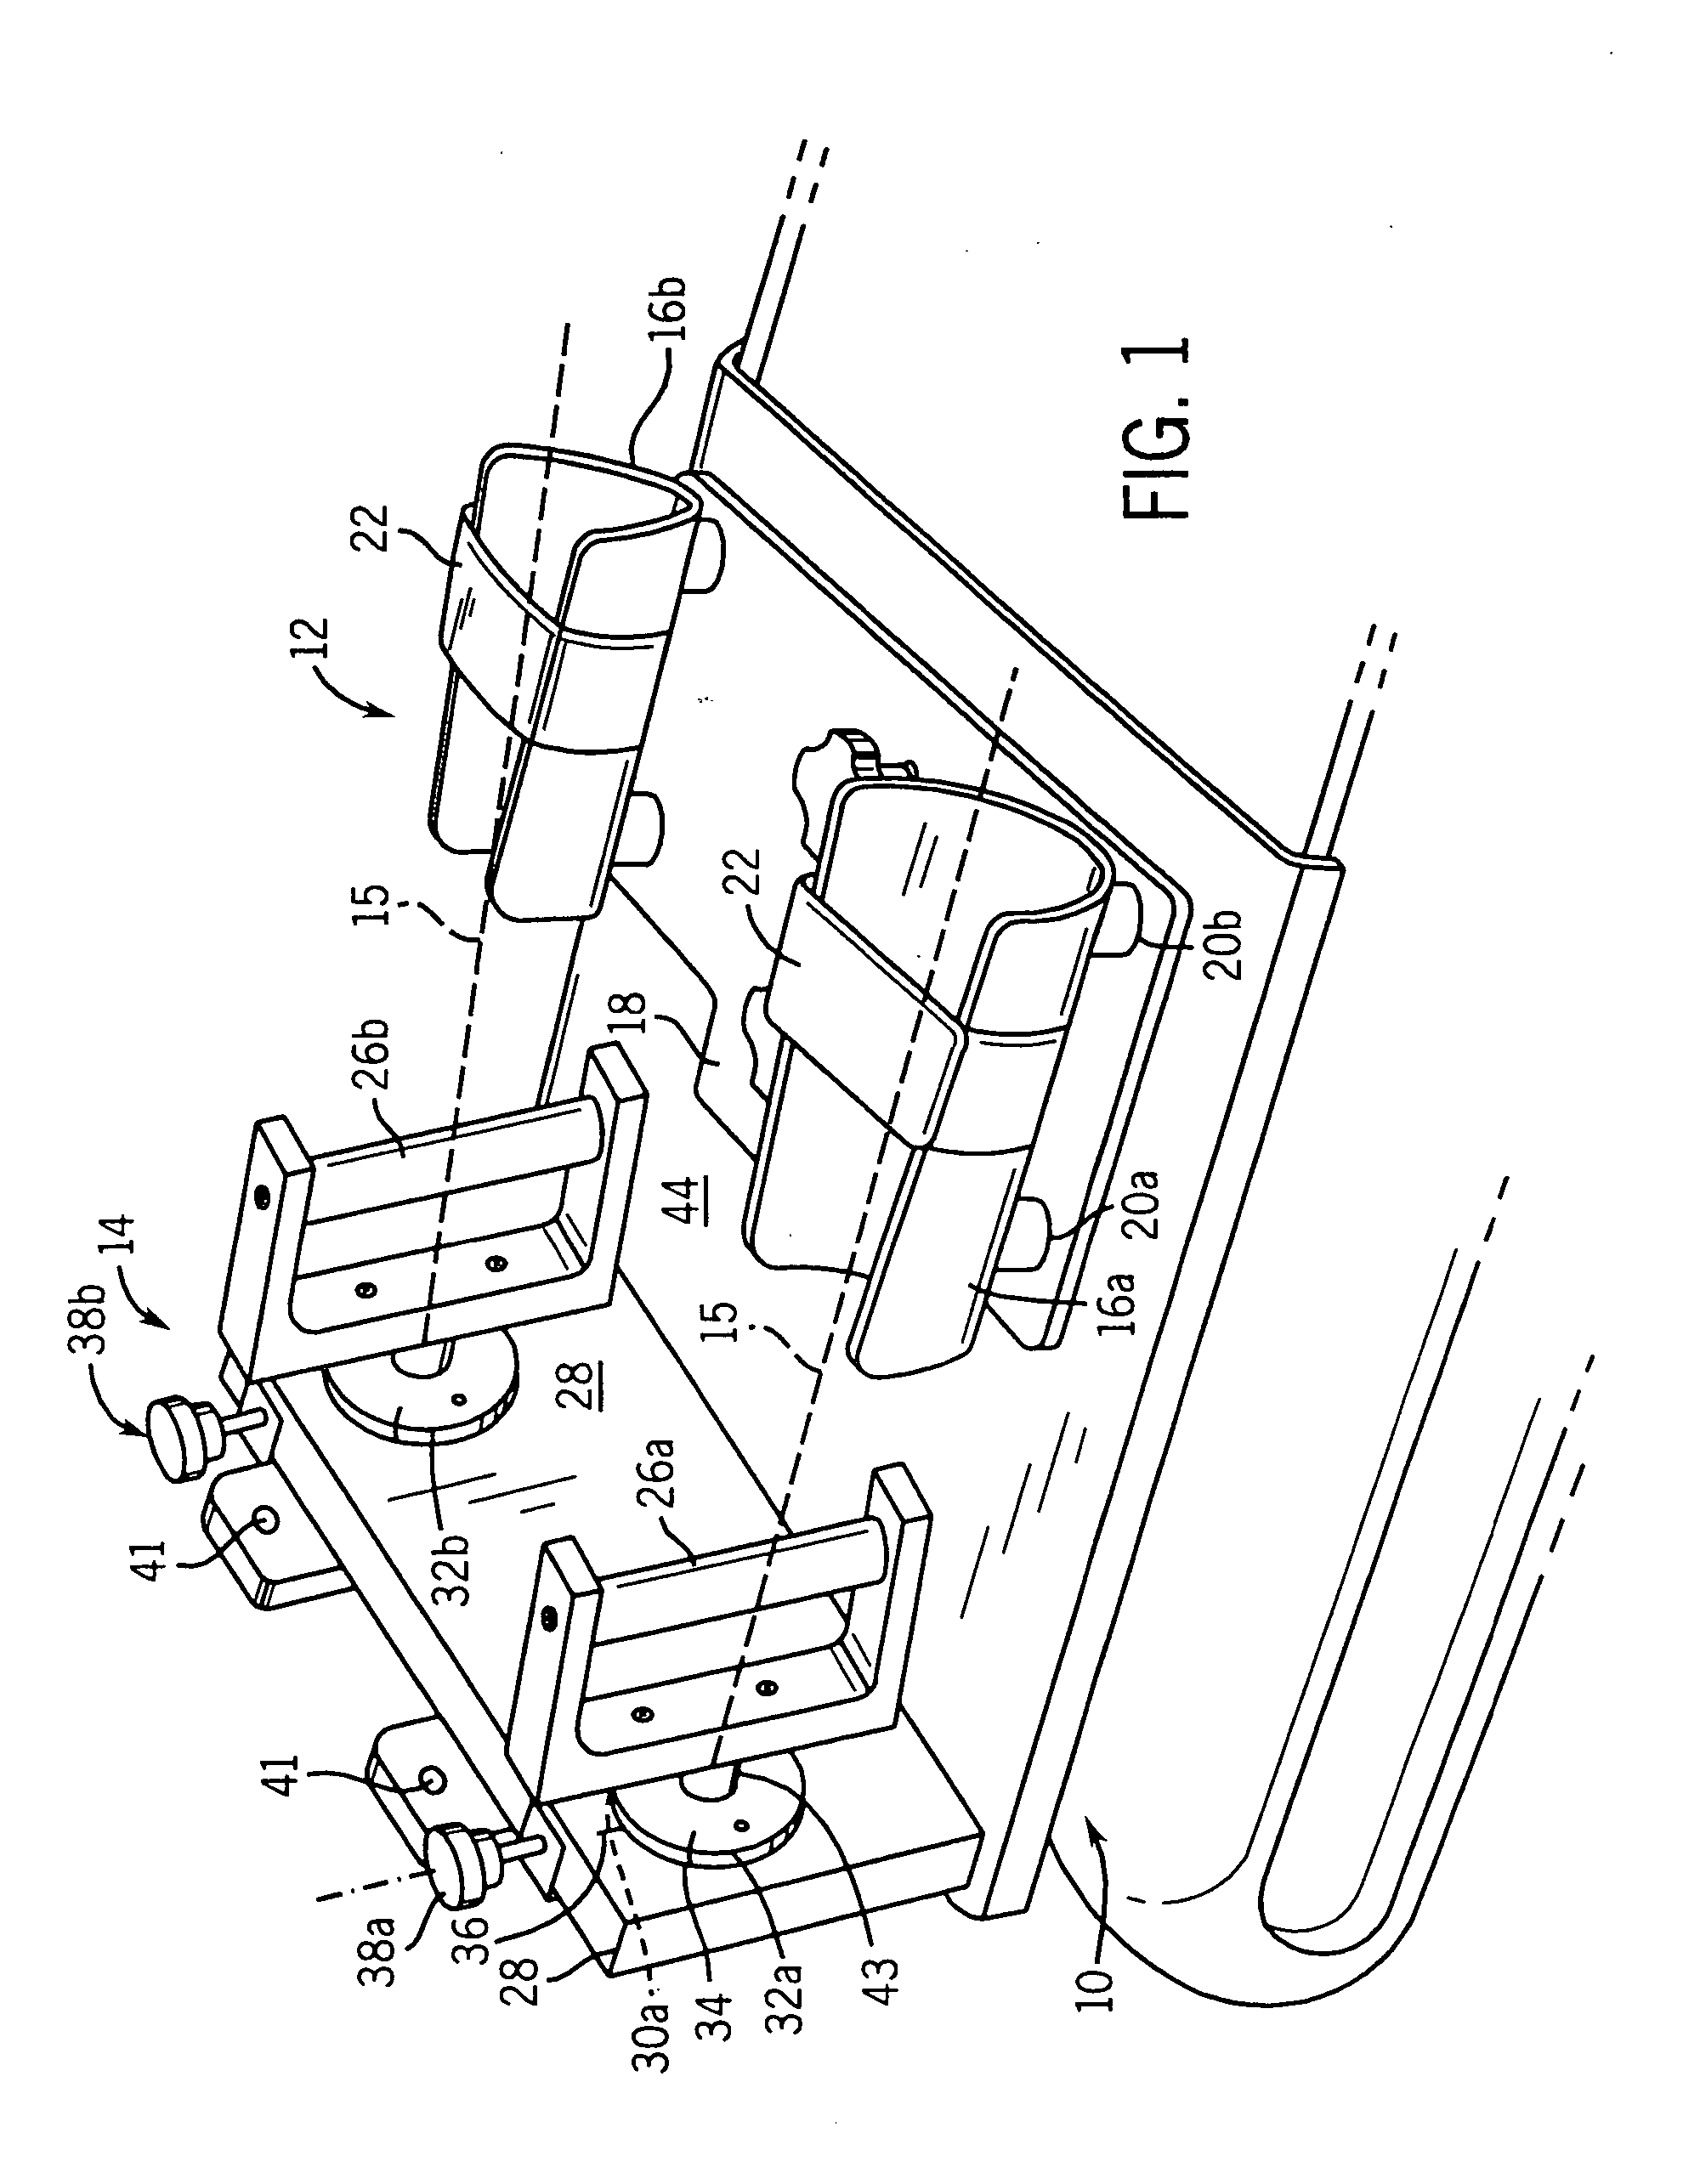 Method and apparatus for positioning a forearm for imaging and analysis